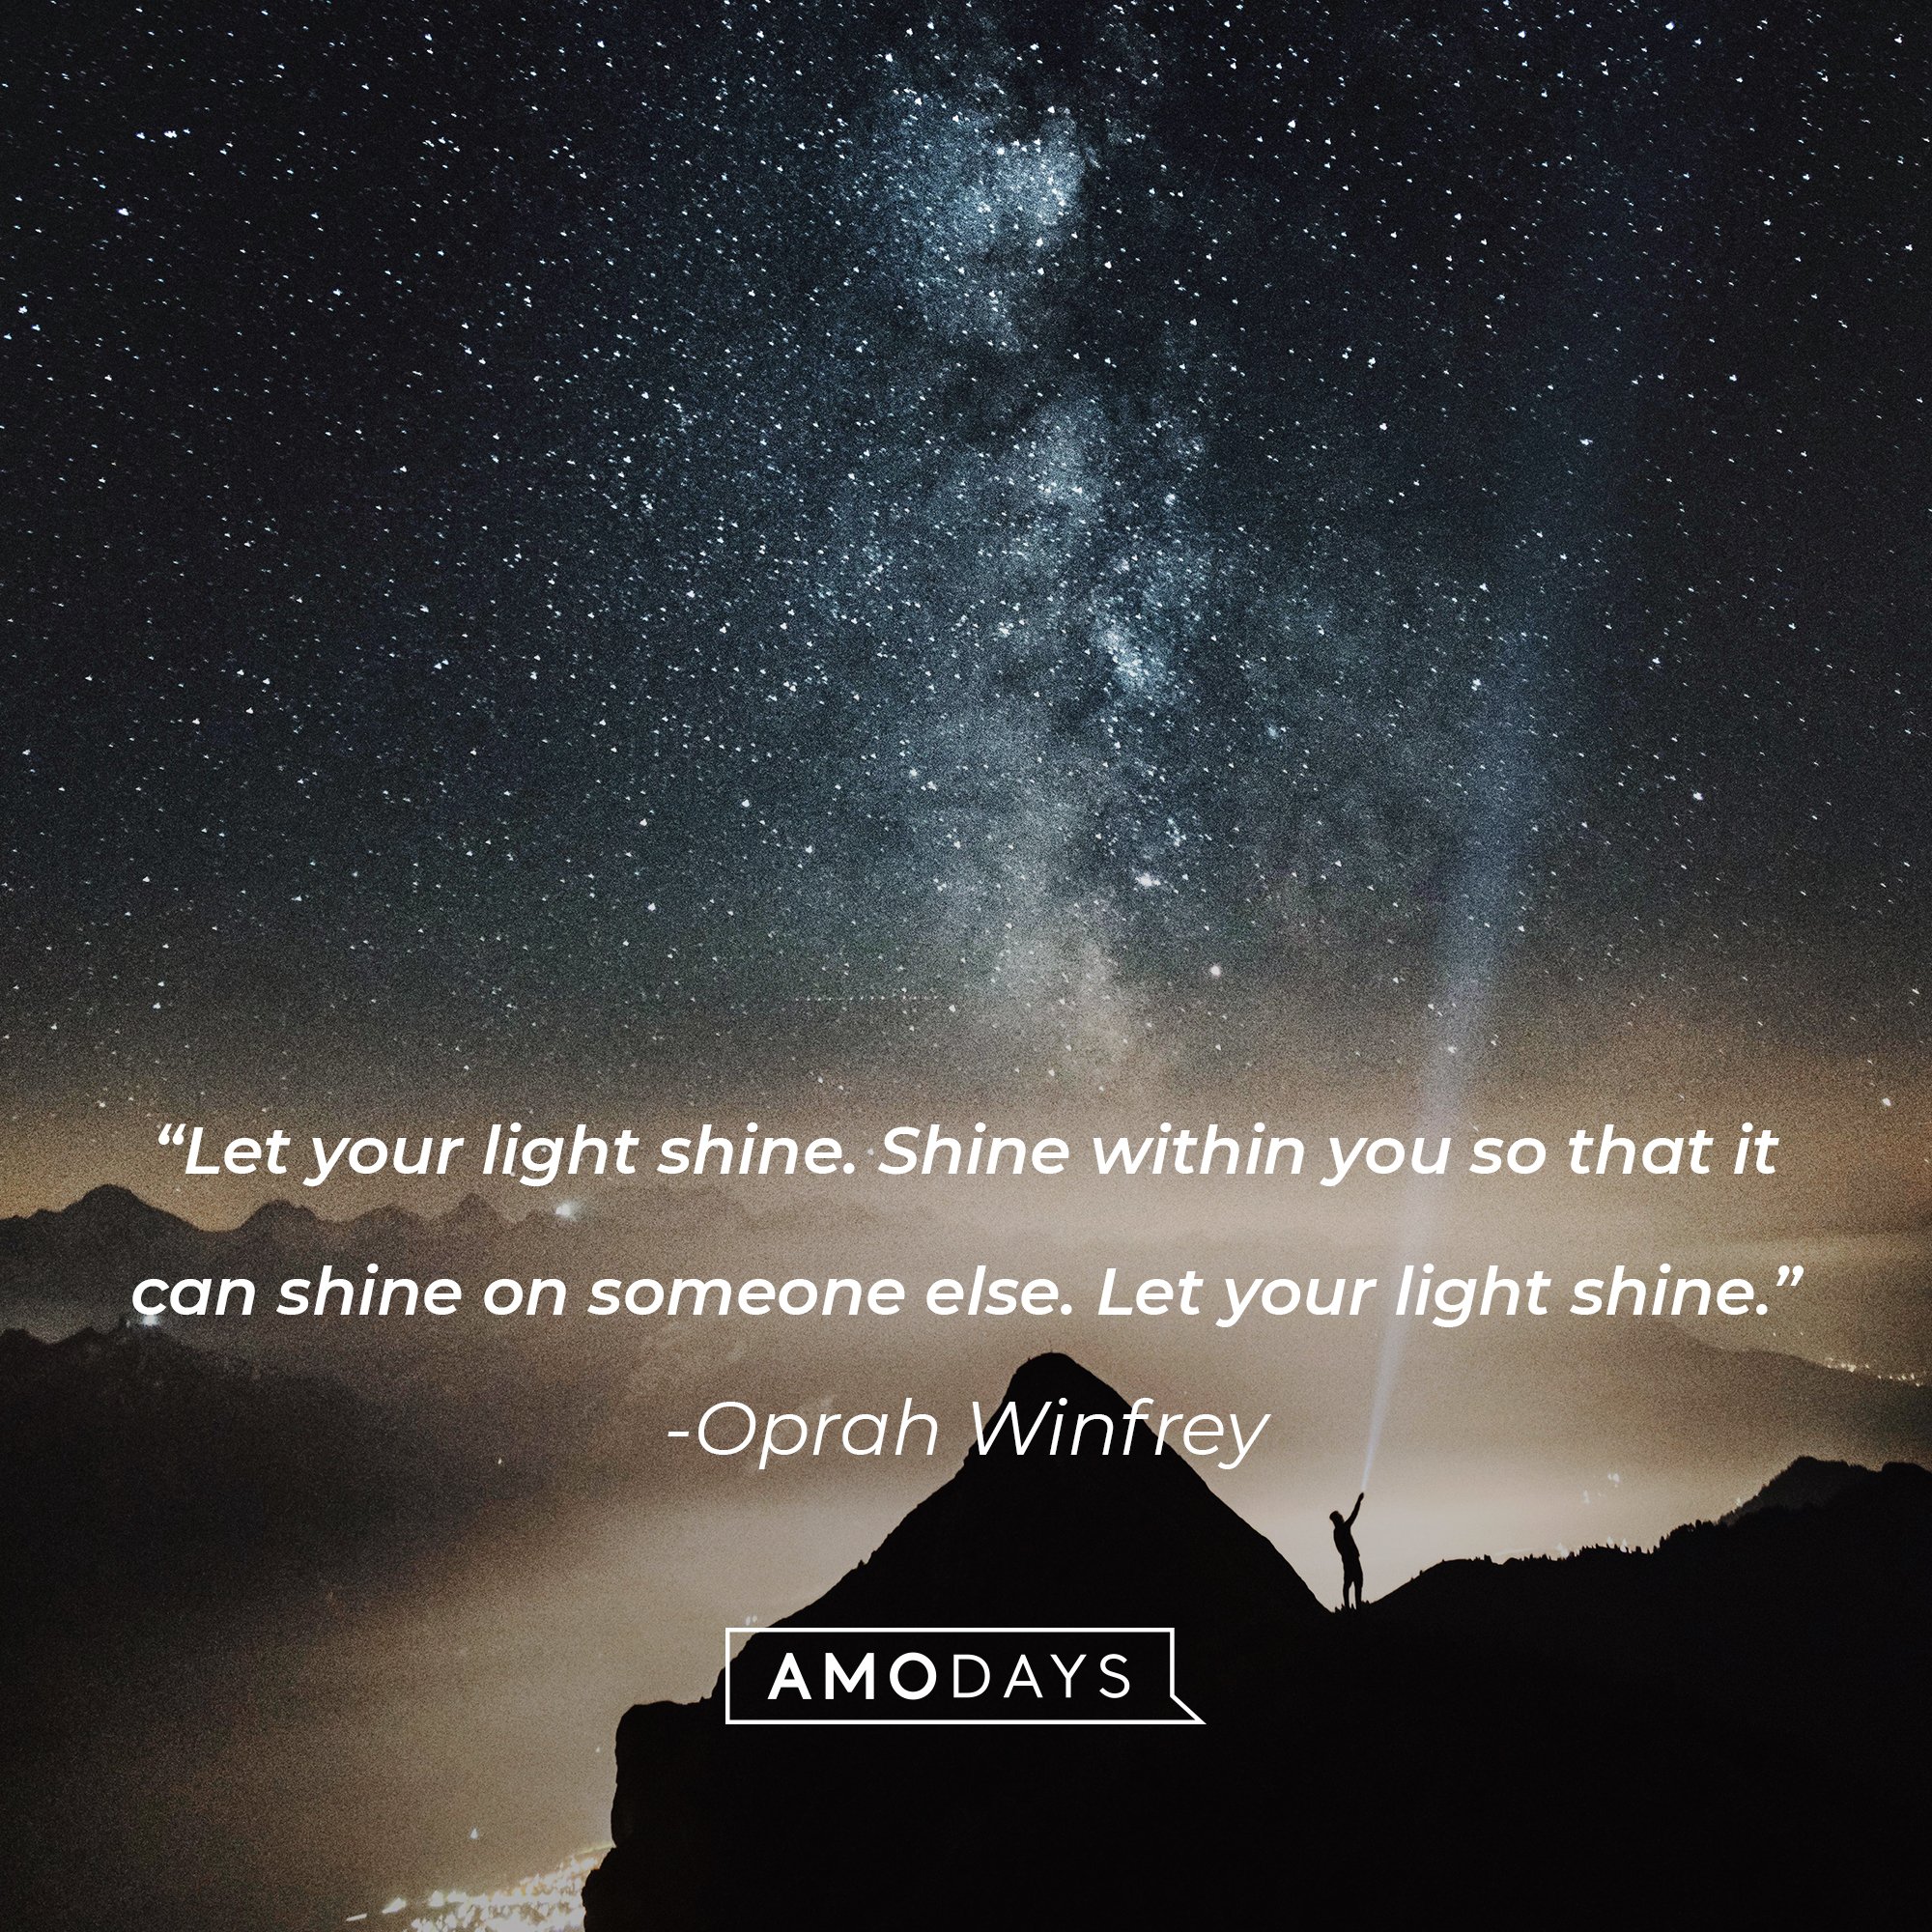 Oprah Winfrey's quote: "Let your light shine. Shine within you so that it can shine on someone else. Let your light shine." | Image: AmoDays